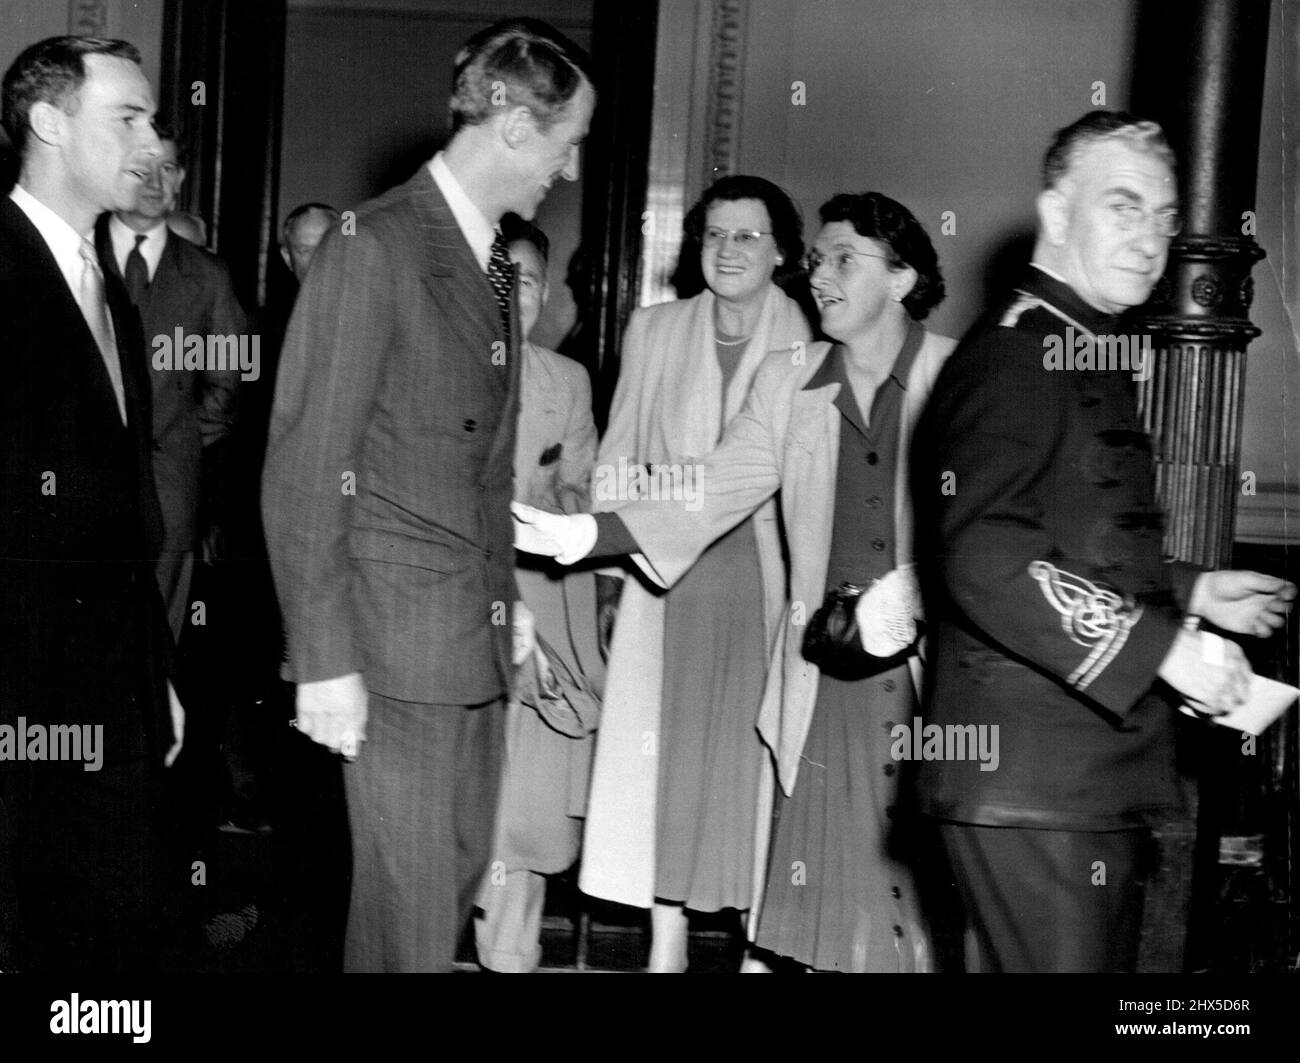 Flashing his now famous smile, Sir Edmund Hillary, of Mount Everest fame, is greeted by Mrs. I.I.Reynolds, who claims she is a cousin of Sir Edmund's, at the civic reception given in his honor at the Sydney Town Hall today. August 5, 1953. (Photo by Associated Newspapers Ltd.). Stock Photo